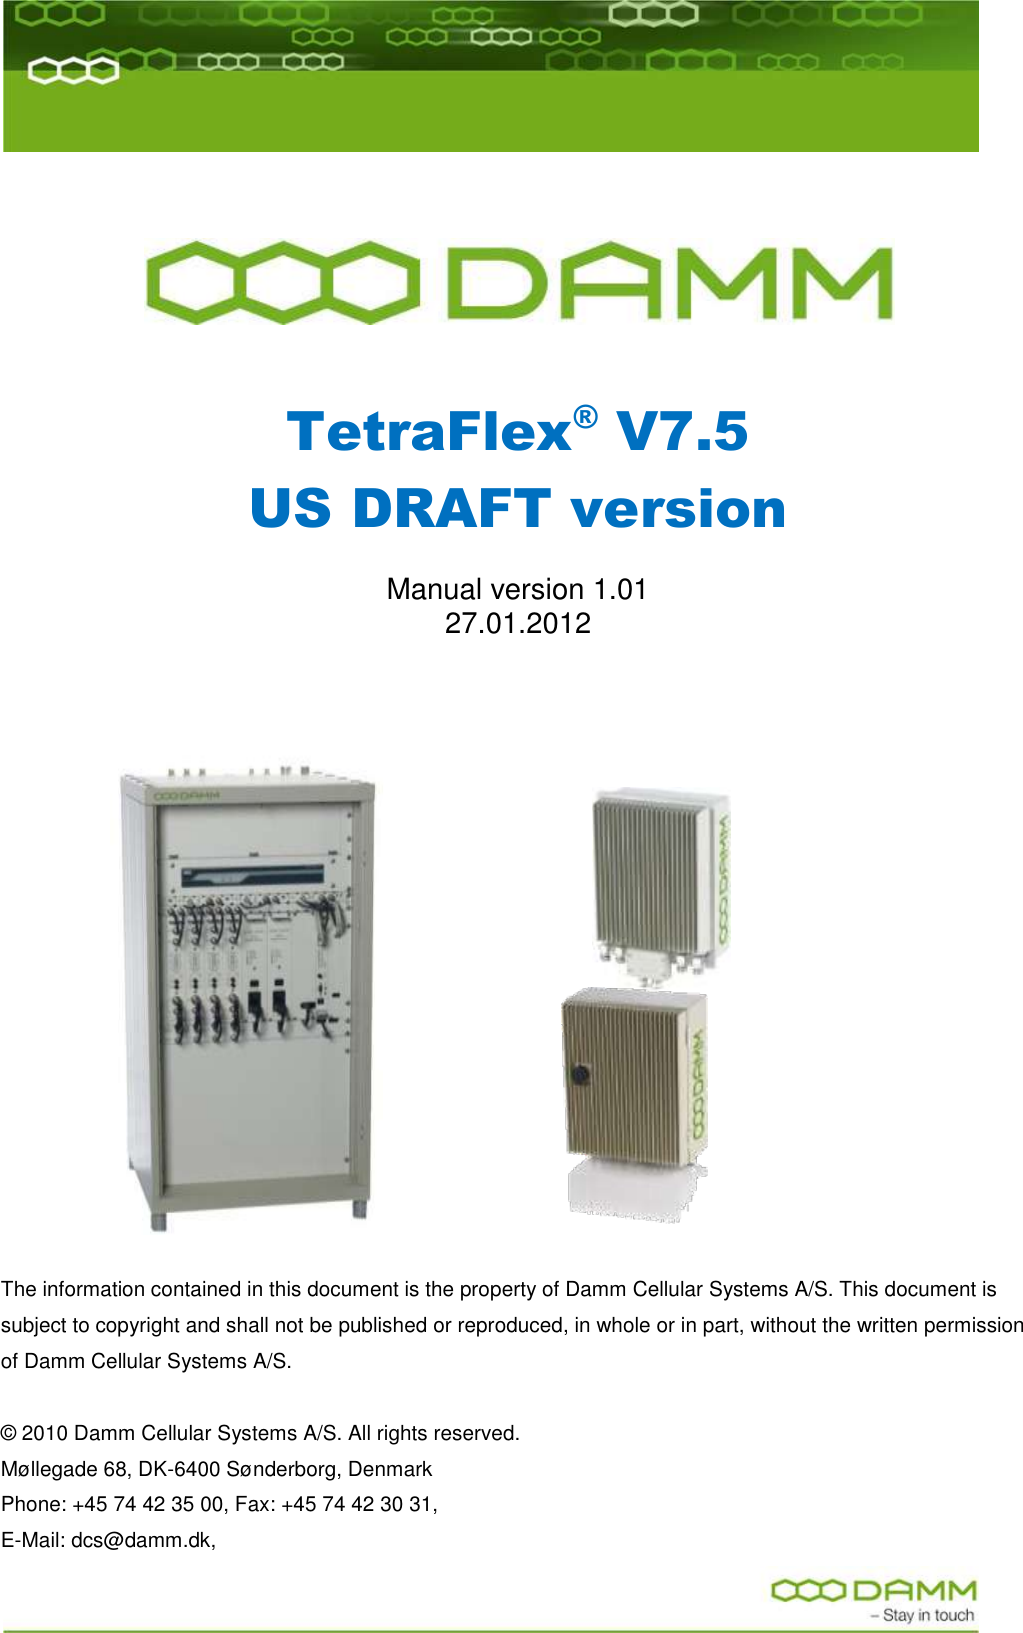        TetraFlex® V7.5 US DRAFT version  Manual version 1.01 27.01.2012                                          The information contained in this document is the property of Damm Cellular Systems A/S. This document is subject to copyright and shall not be published or reproduced, in whole or in part, without the written permission of Damm Cellular Systems A/S.   © 2010 Damm Cellular Systems A/S. All rights reserved.   Møllegade 68, DK-6400 Sønderborg, Denmark  Phone: +45 74 42 35 00, Fax: +45 74 42 30 31,  E-Mail: dcs@damm.dk,  